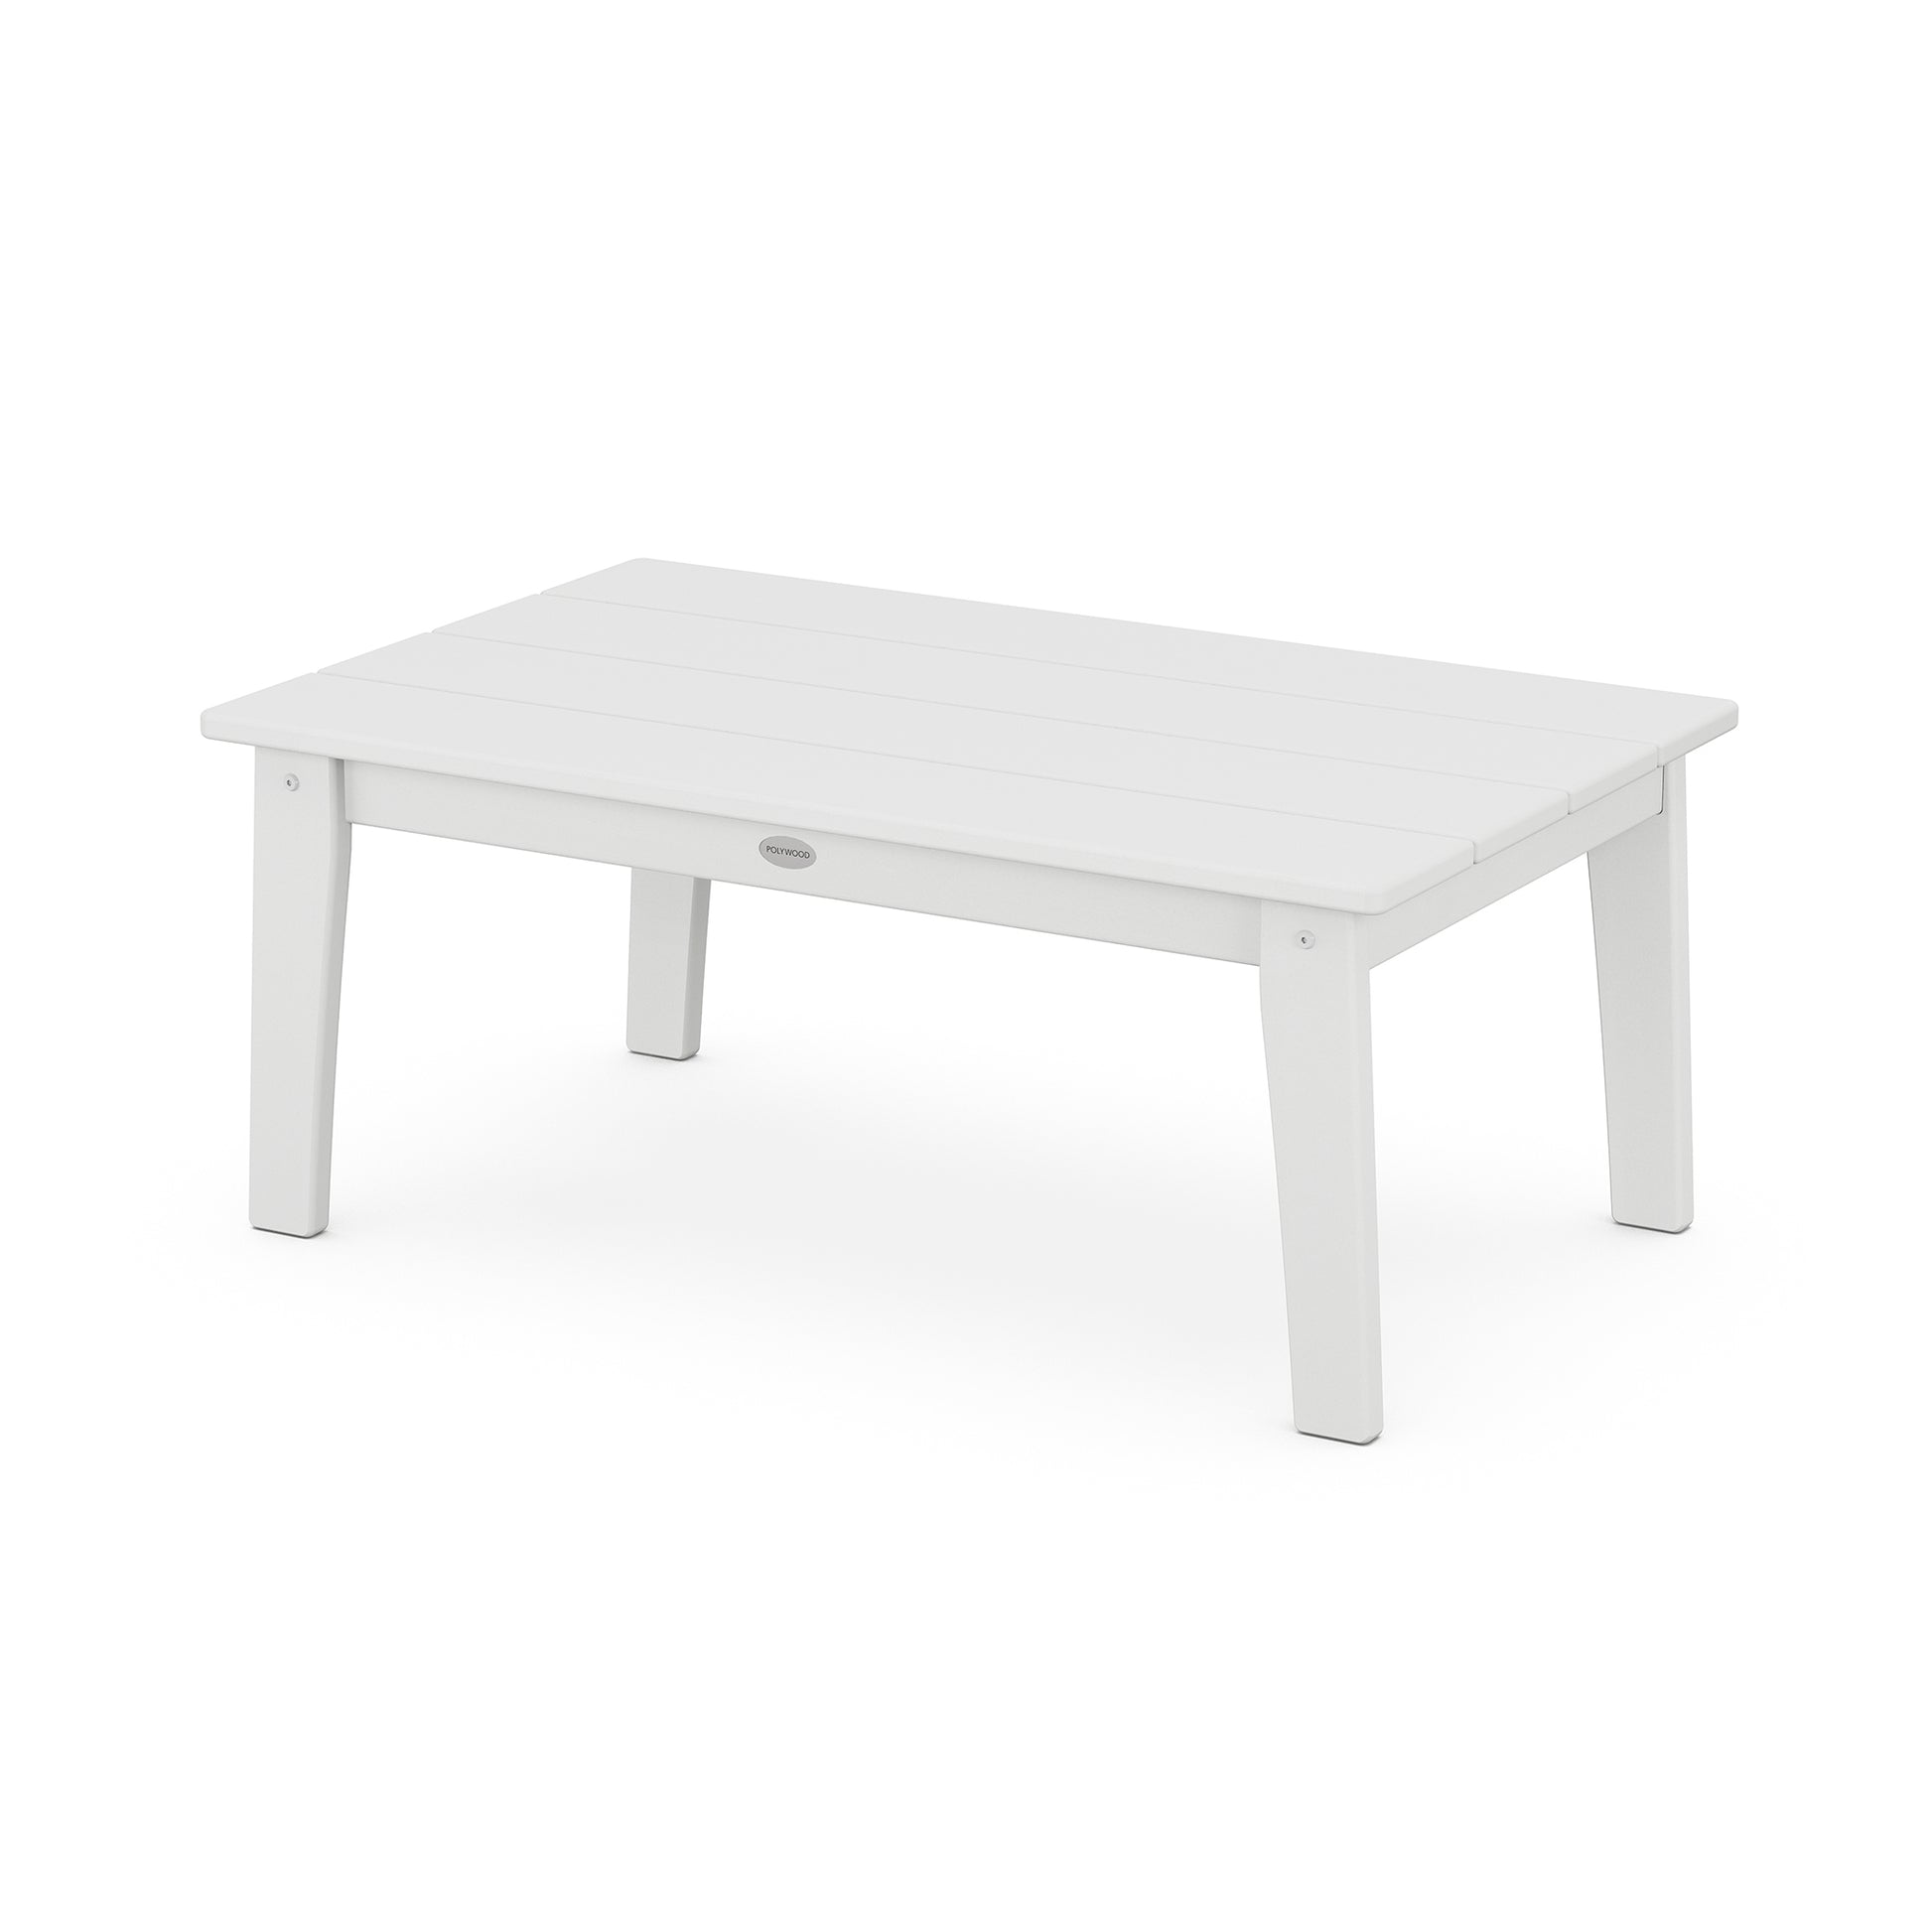 A simple white rectangular POLYWOOD Lakeside 23" x 36" coffee table with a slatted top and solid legs, isolated on a white background.